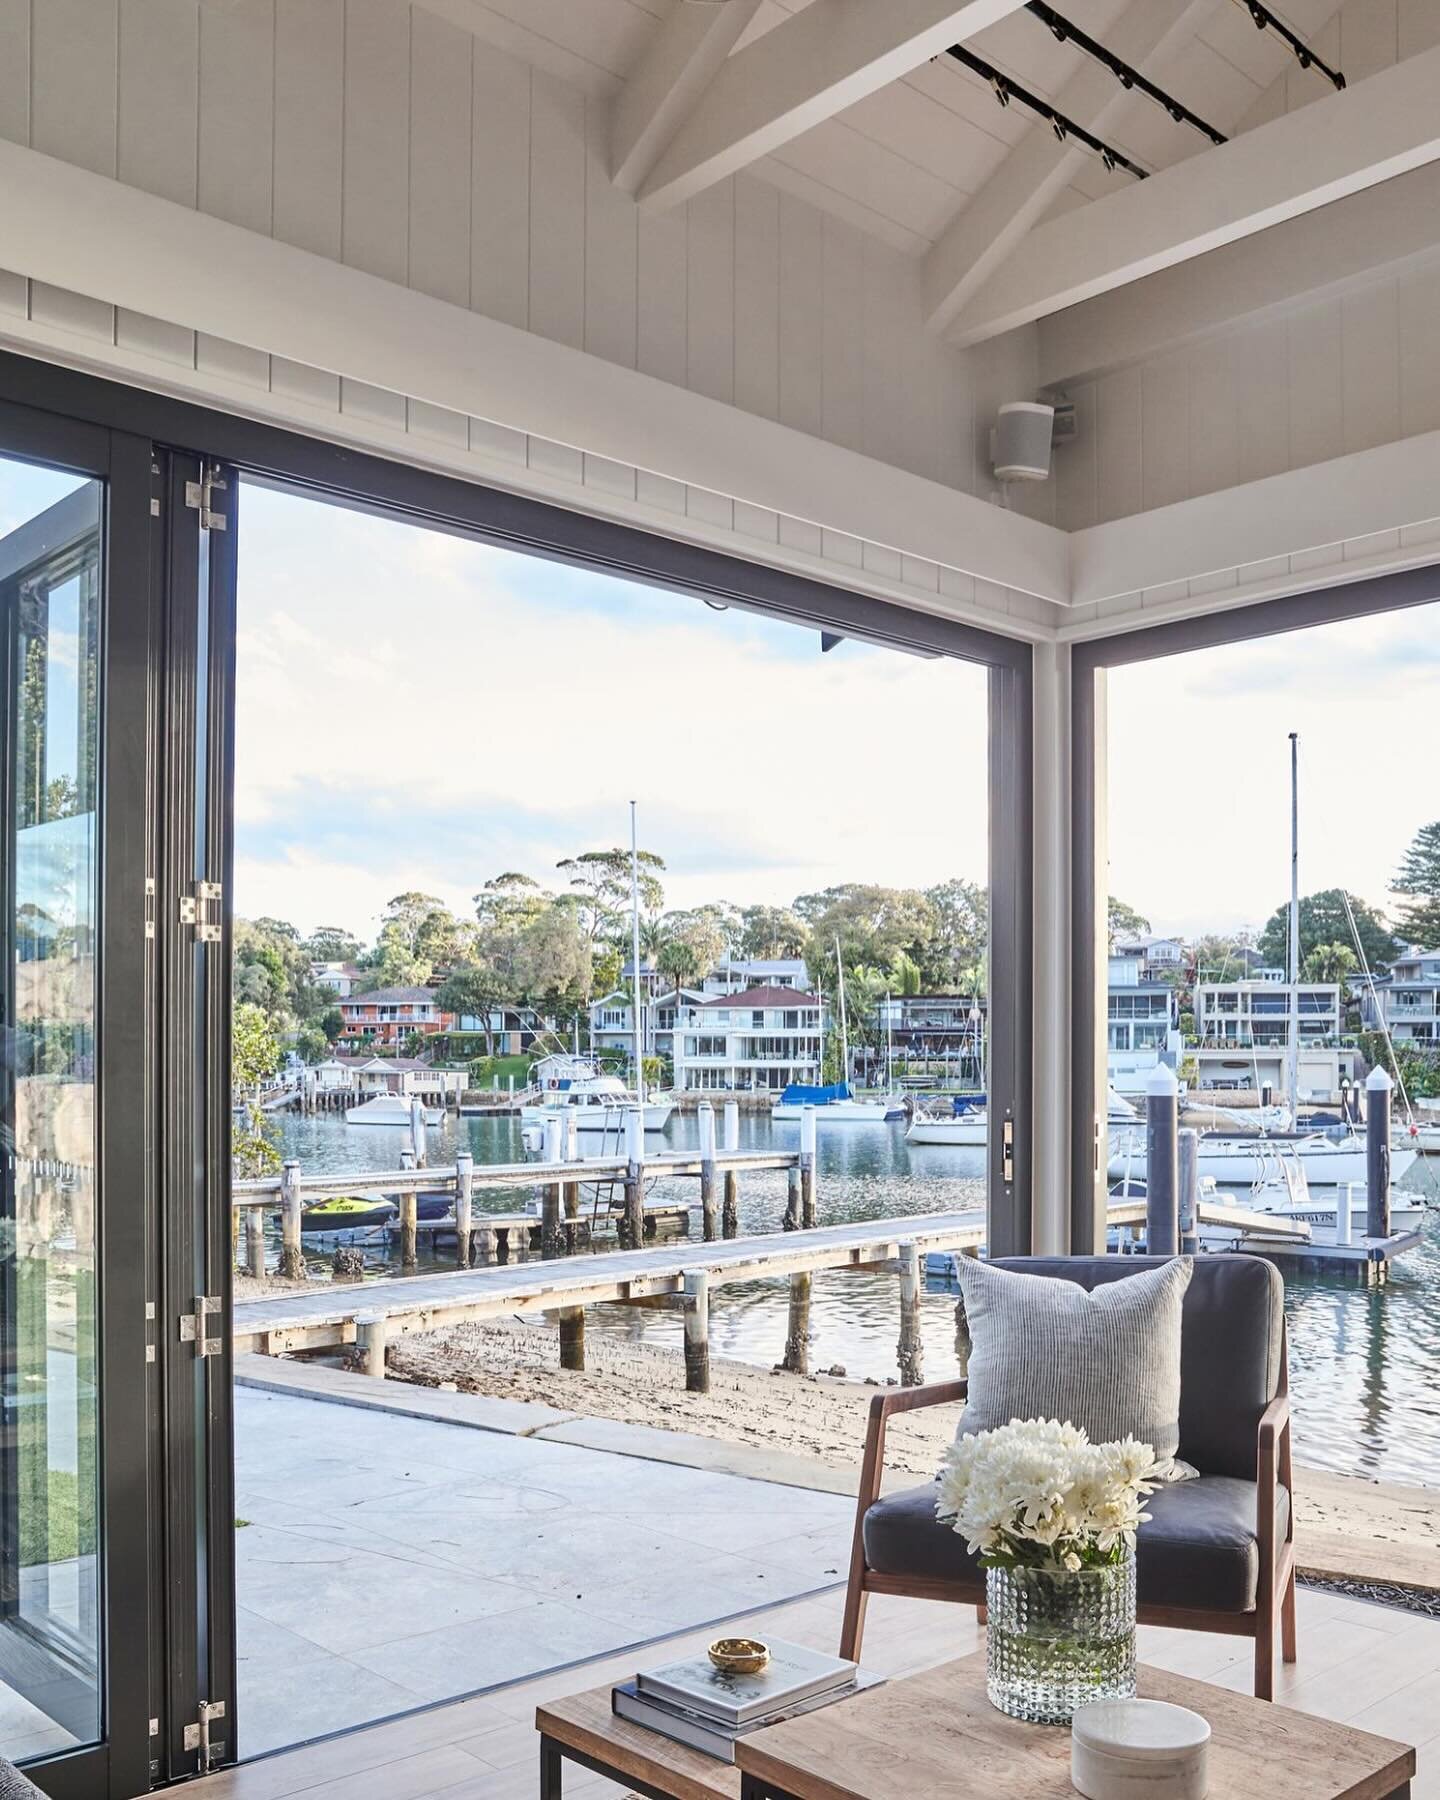 Waterfront living at its best!! This cosy boathouse is not only functional with room for storing those all important fishing rods in the rafters but is also a place to kick back and enjoy the views with friends or just watch the world go by! The perf